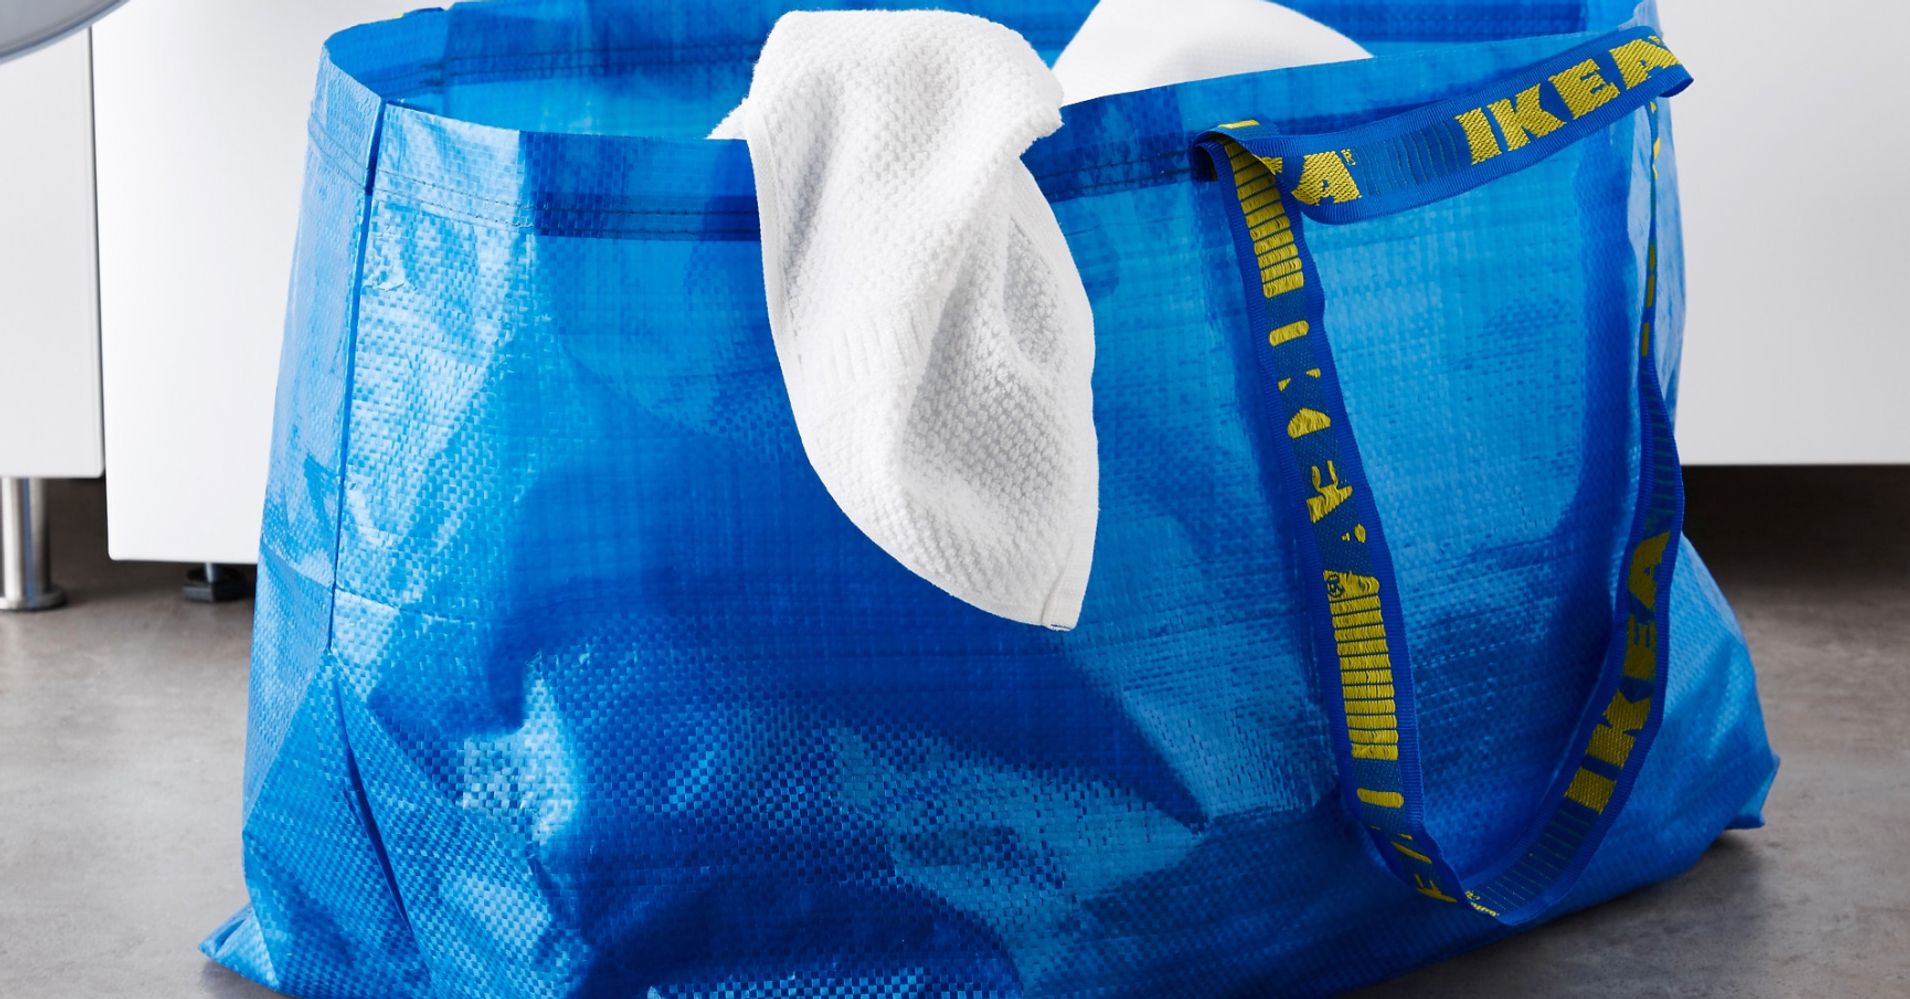 This Bride’s Ikea Shopping Bag Hack Can Help You Pee In A Wedding Dress | HuffPost Life